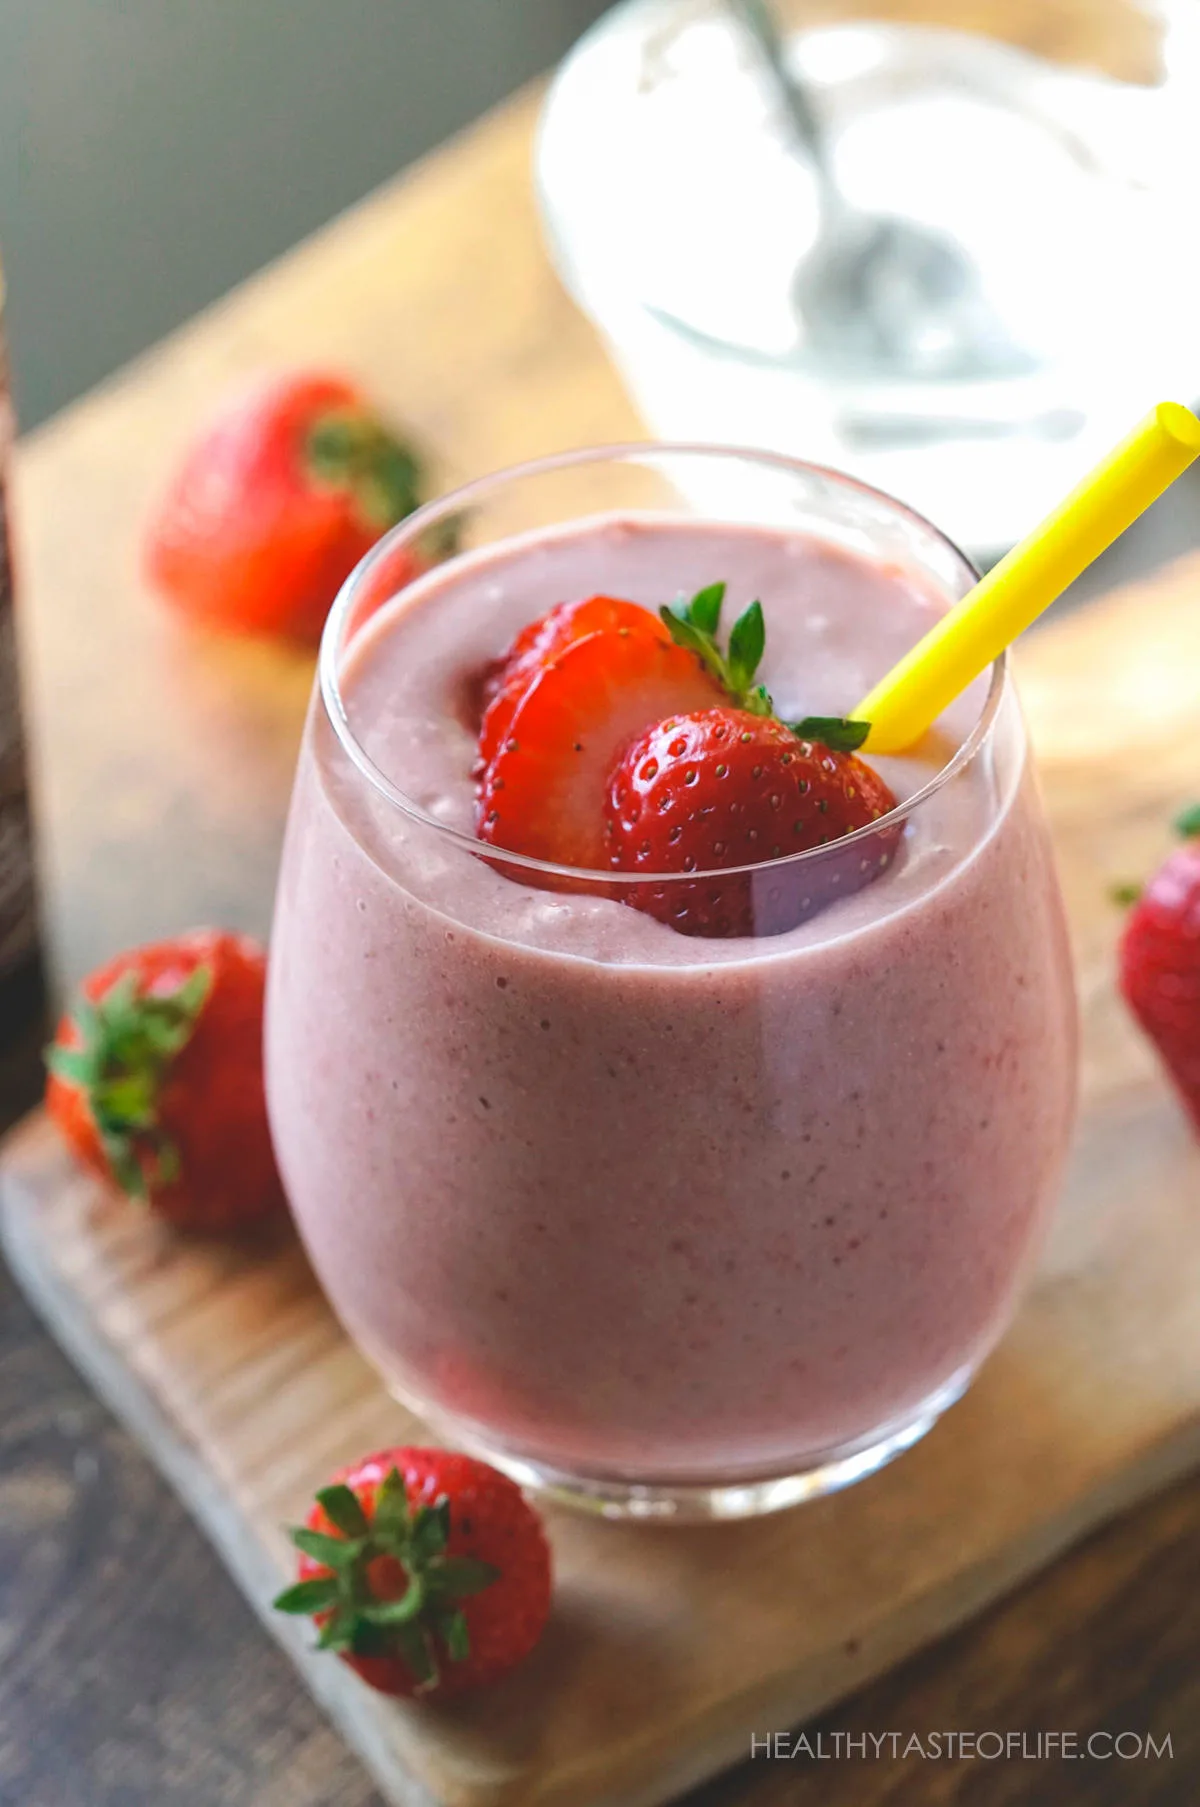 Strawberry and banana milkshake in a glass with a sliced strawberry and a straw.